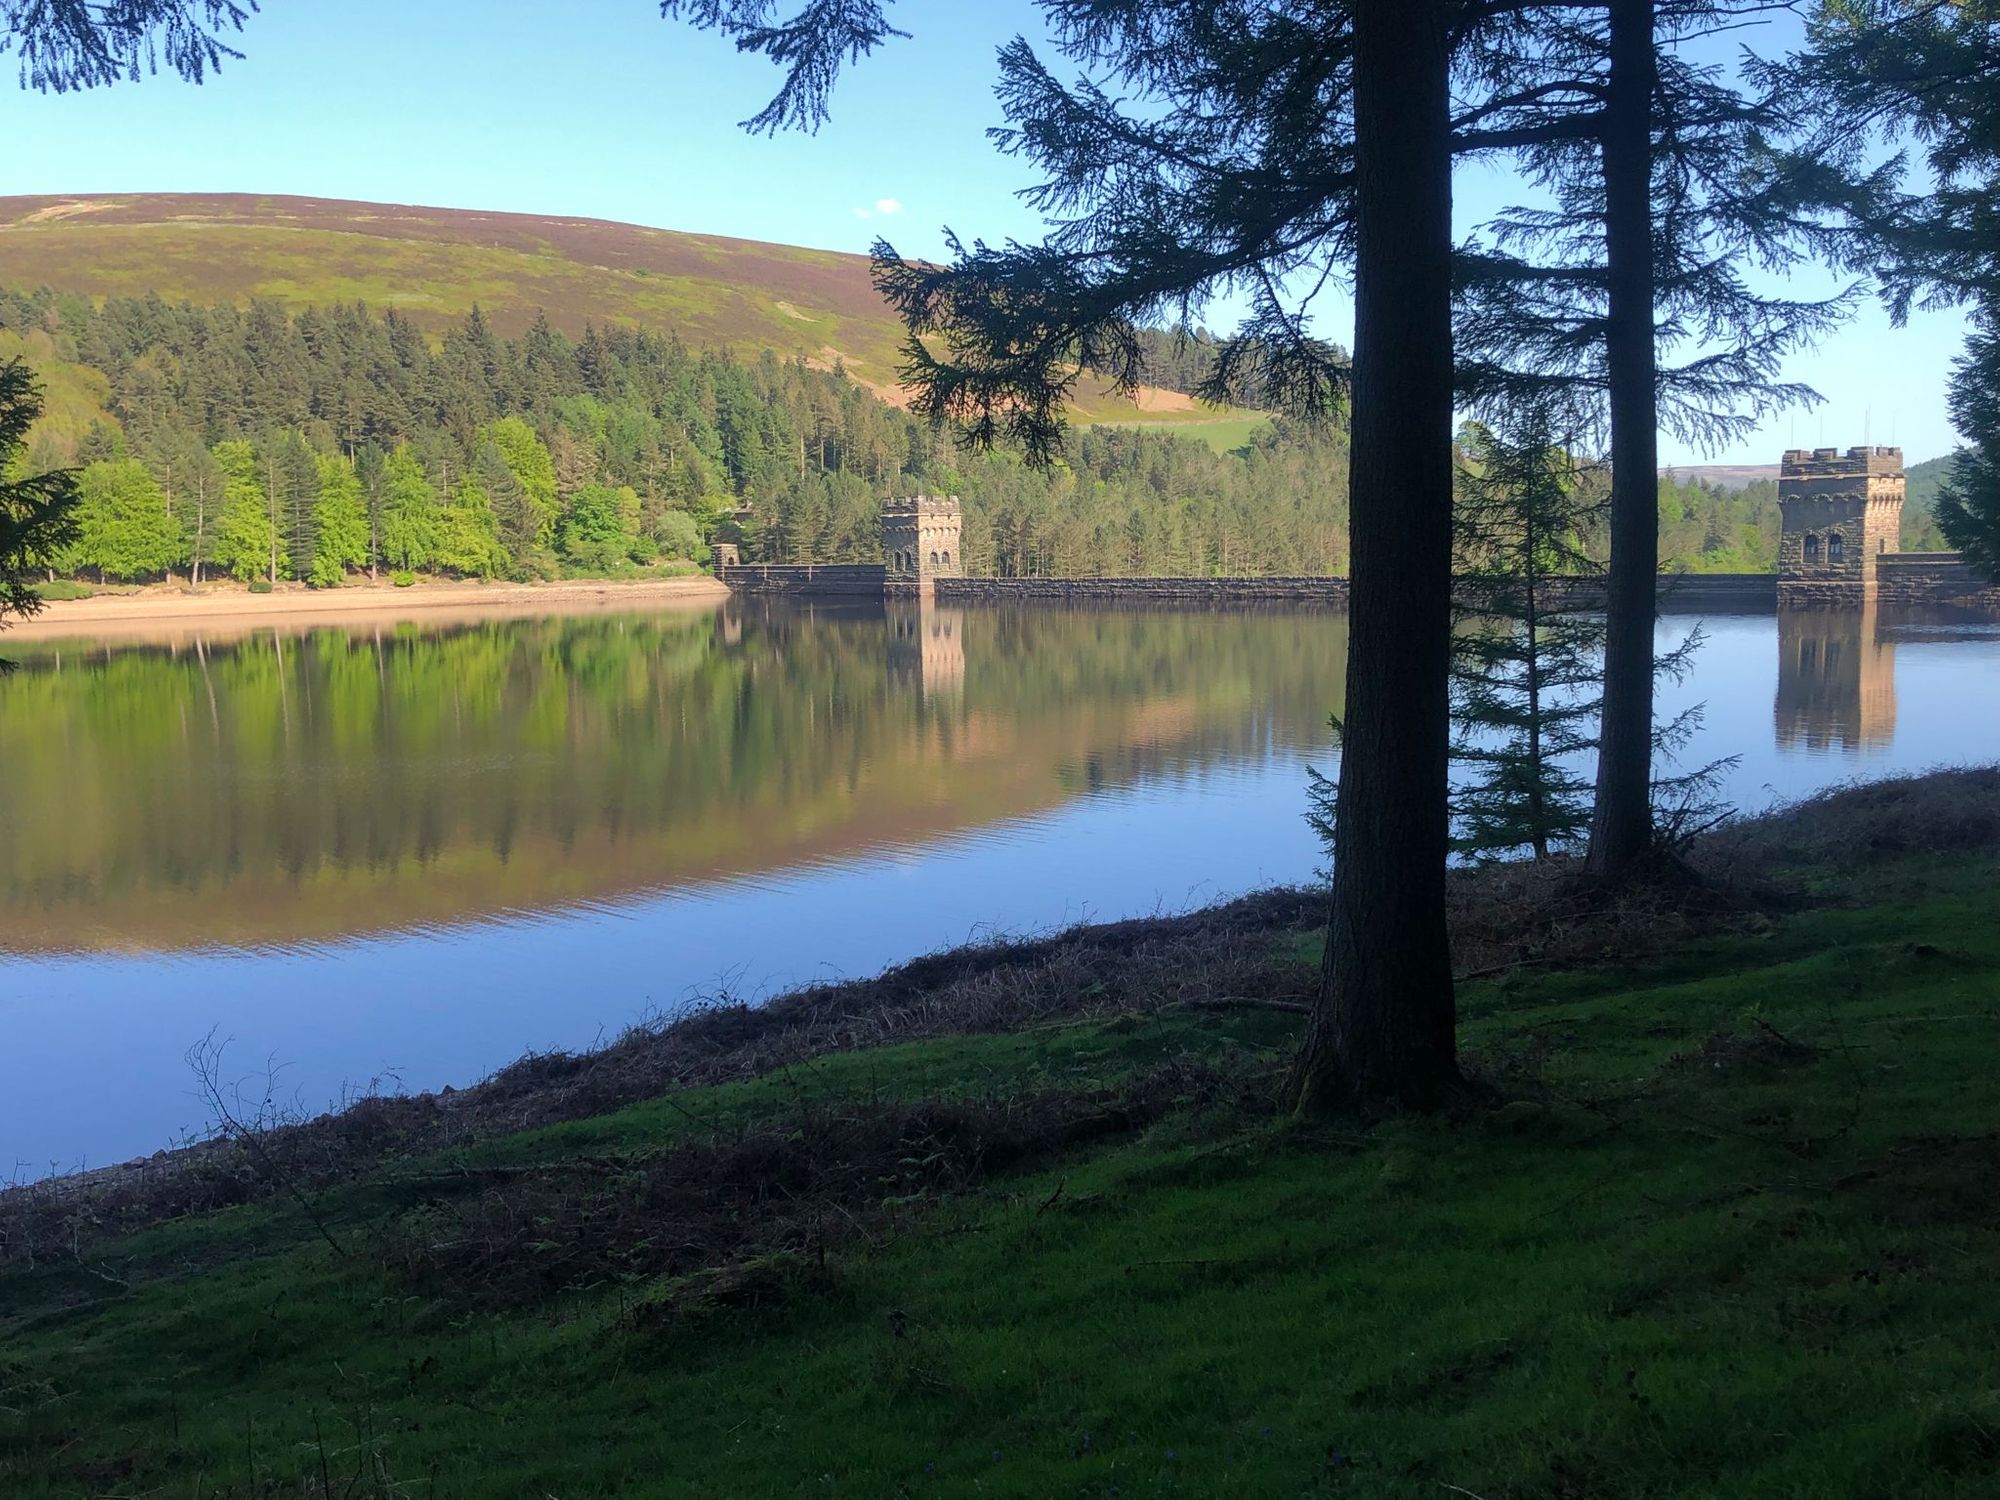 Picturesque dam on the reservoir, surrounded by green hills under blue skies.